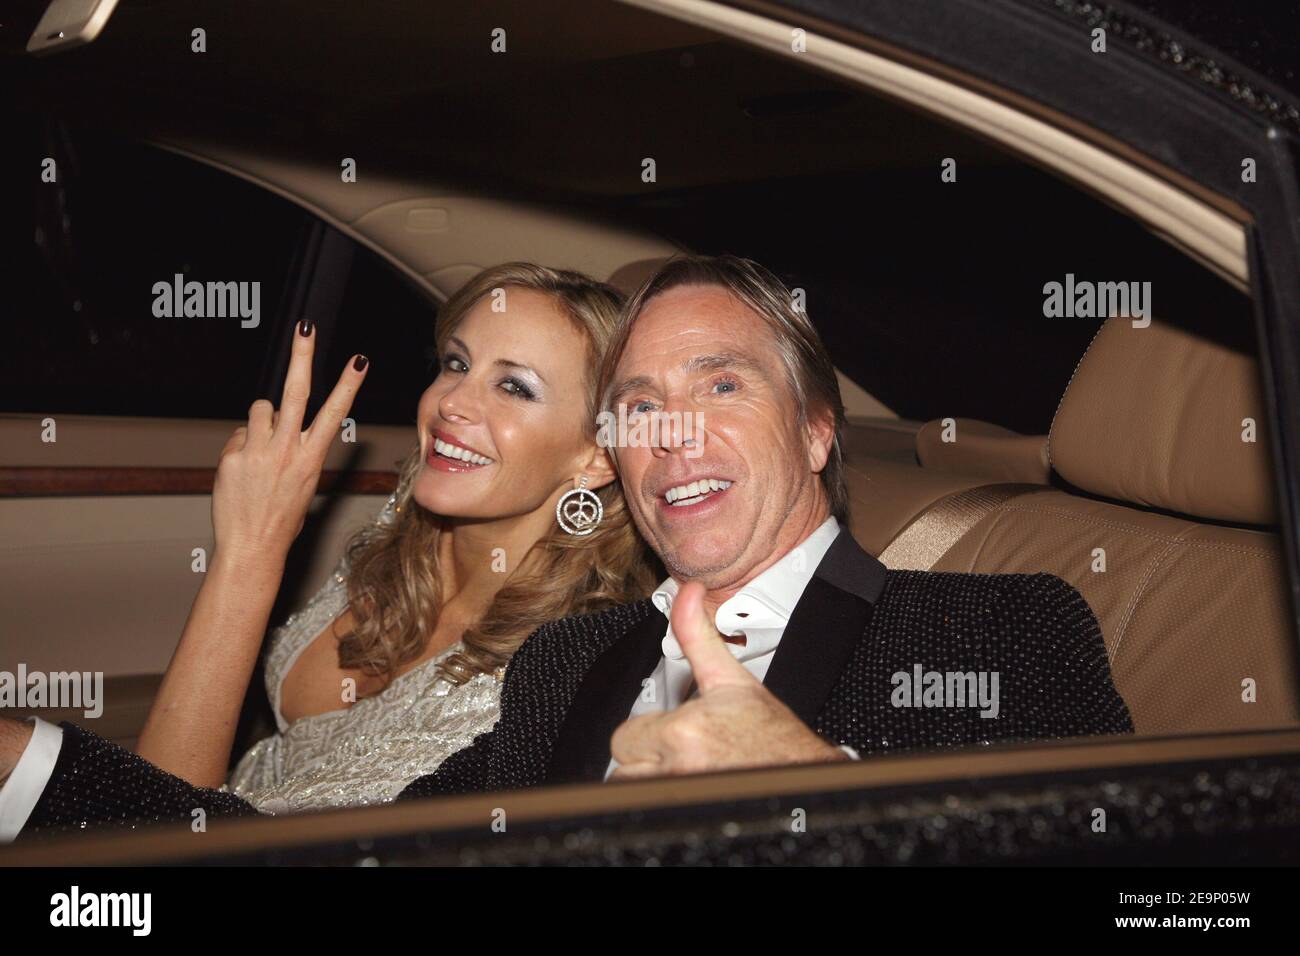 US Fashion designer Tommy Hilfiger poses with his girlfriend Dee Ocleppo  arrive at the opening party for Tommy Hilfiger's flagship store in Paris,  France, on October 18, 2006. The store, located on